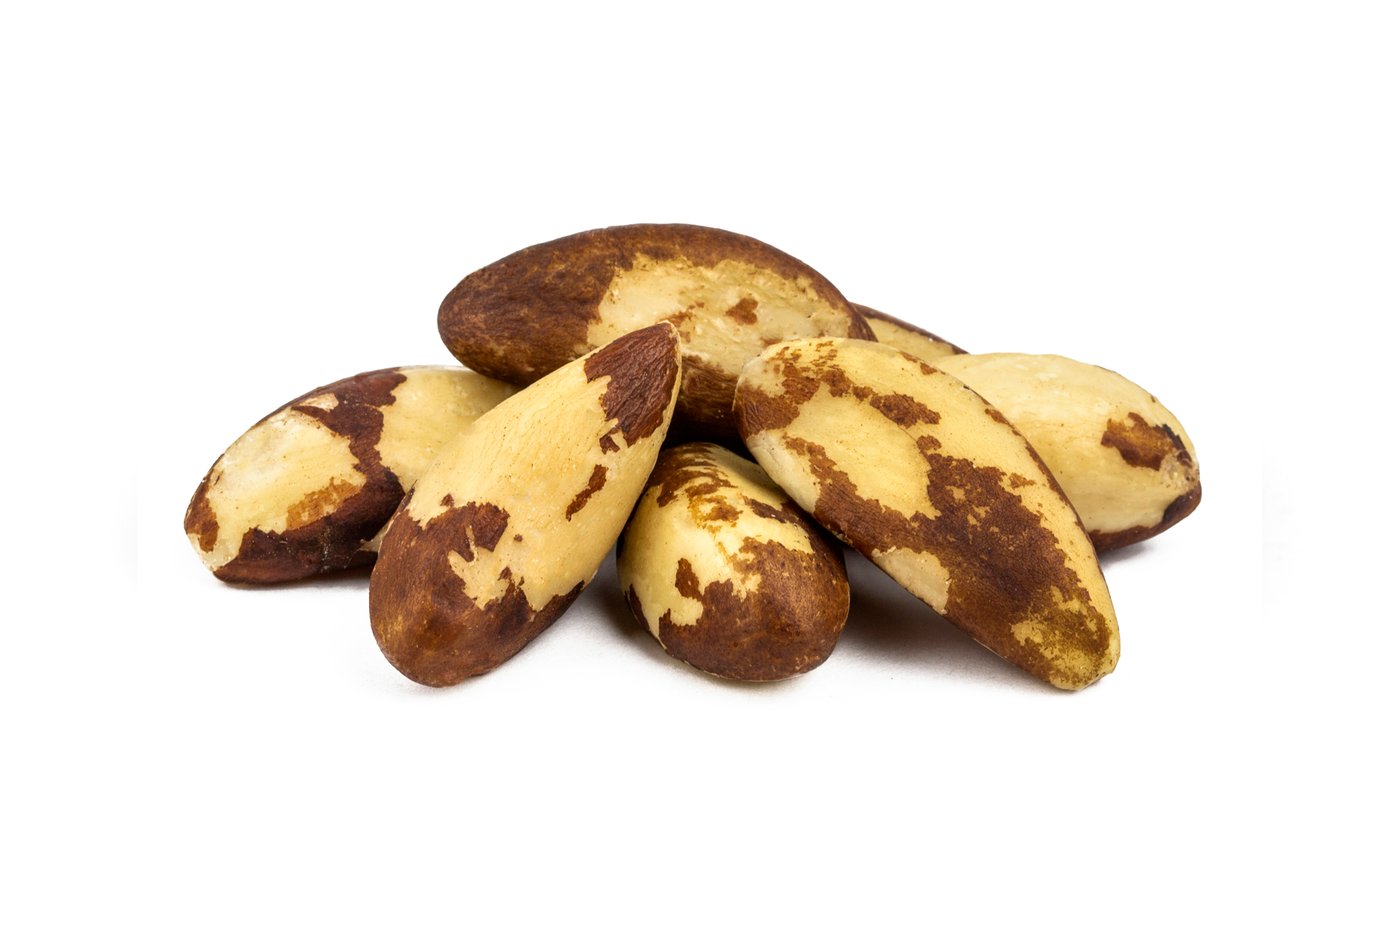 Roasted Brazil Nuts (Unsalted) photo